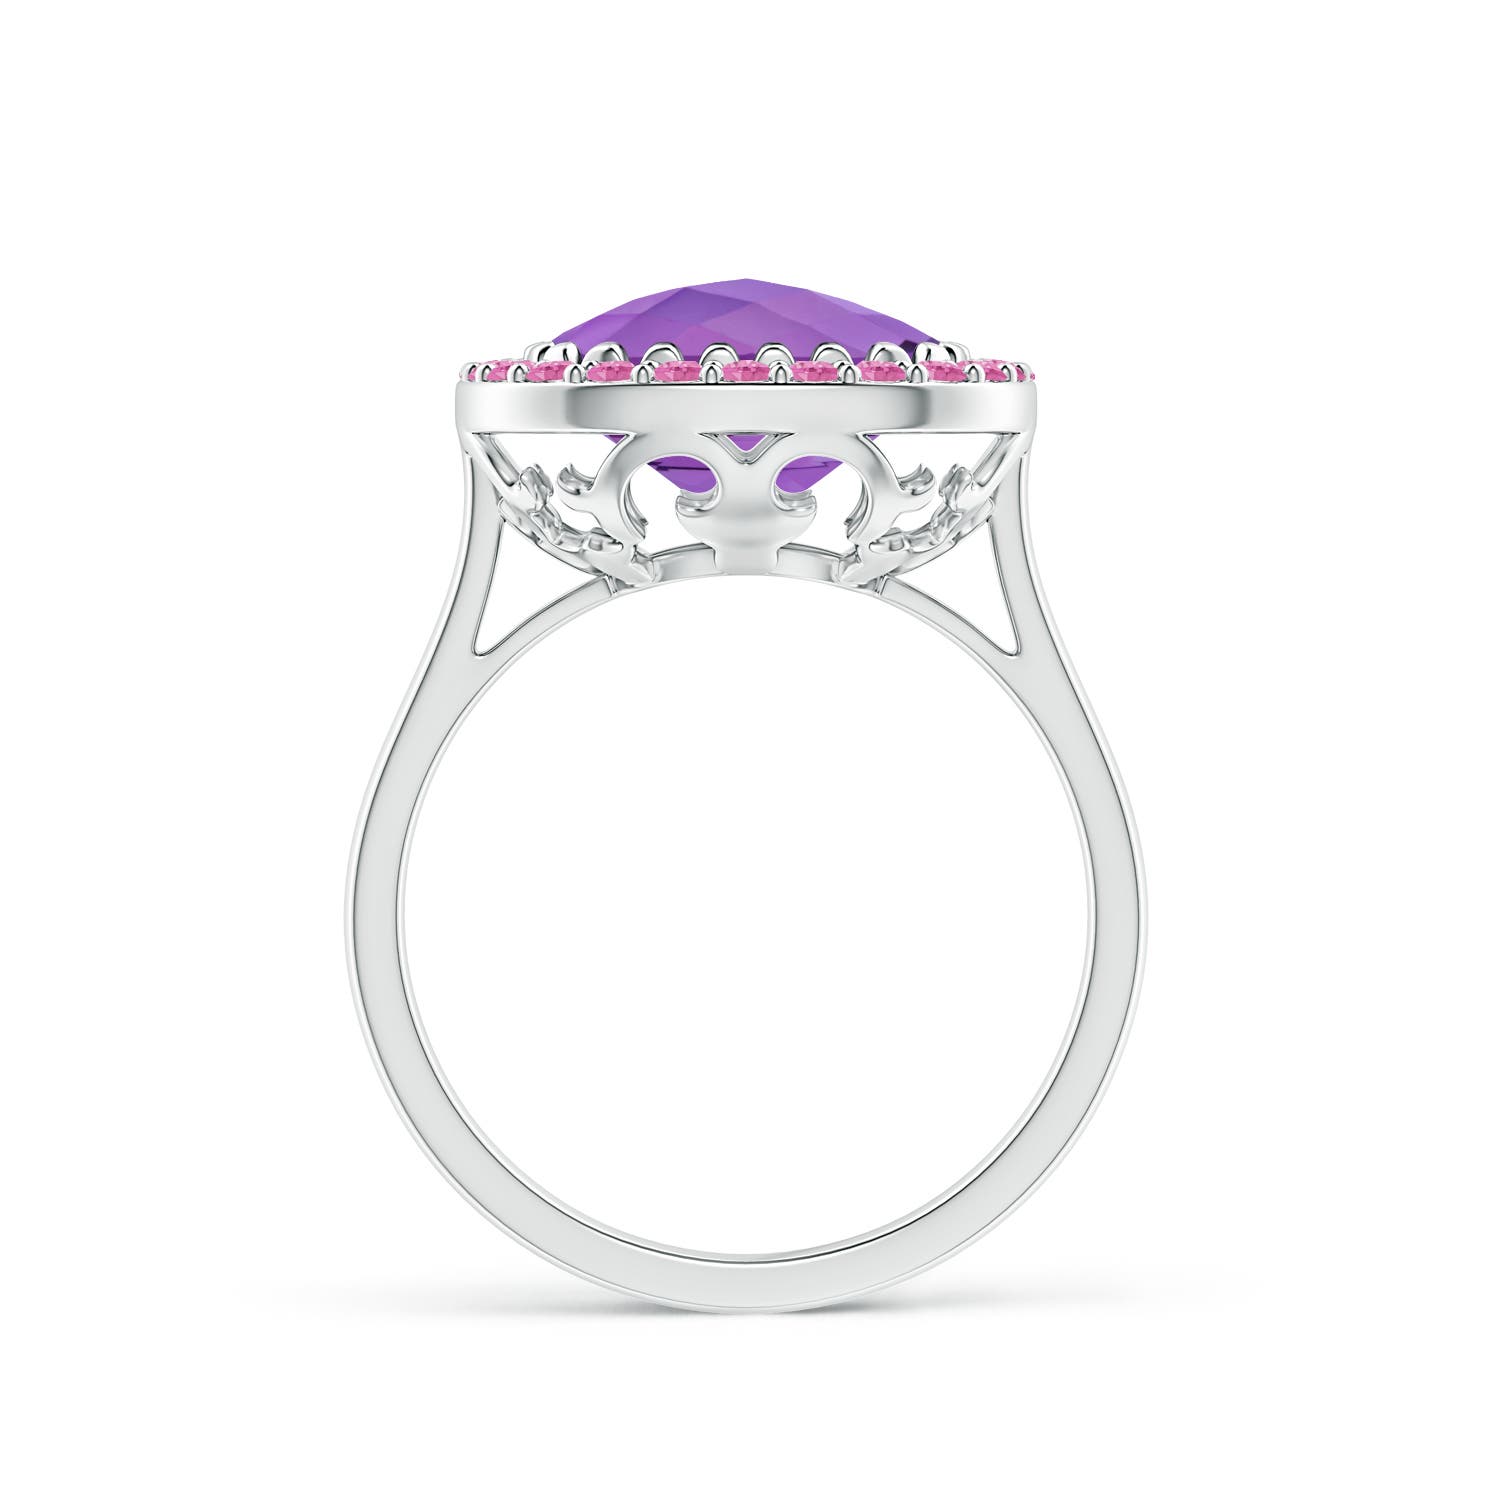 AA - Amethyst / 4.65 CT / 14 KT White Gold